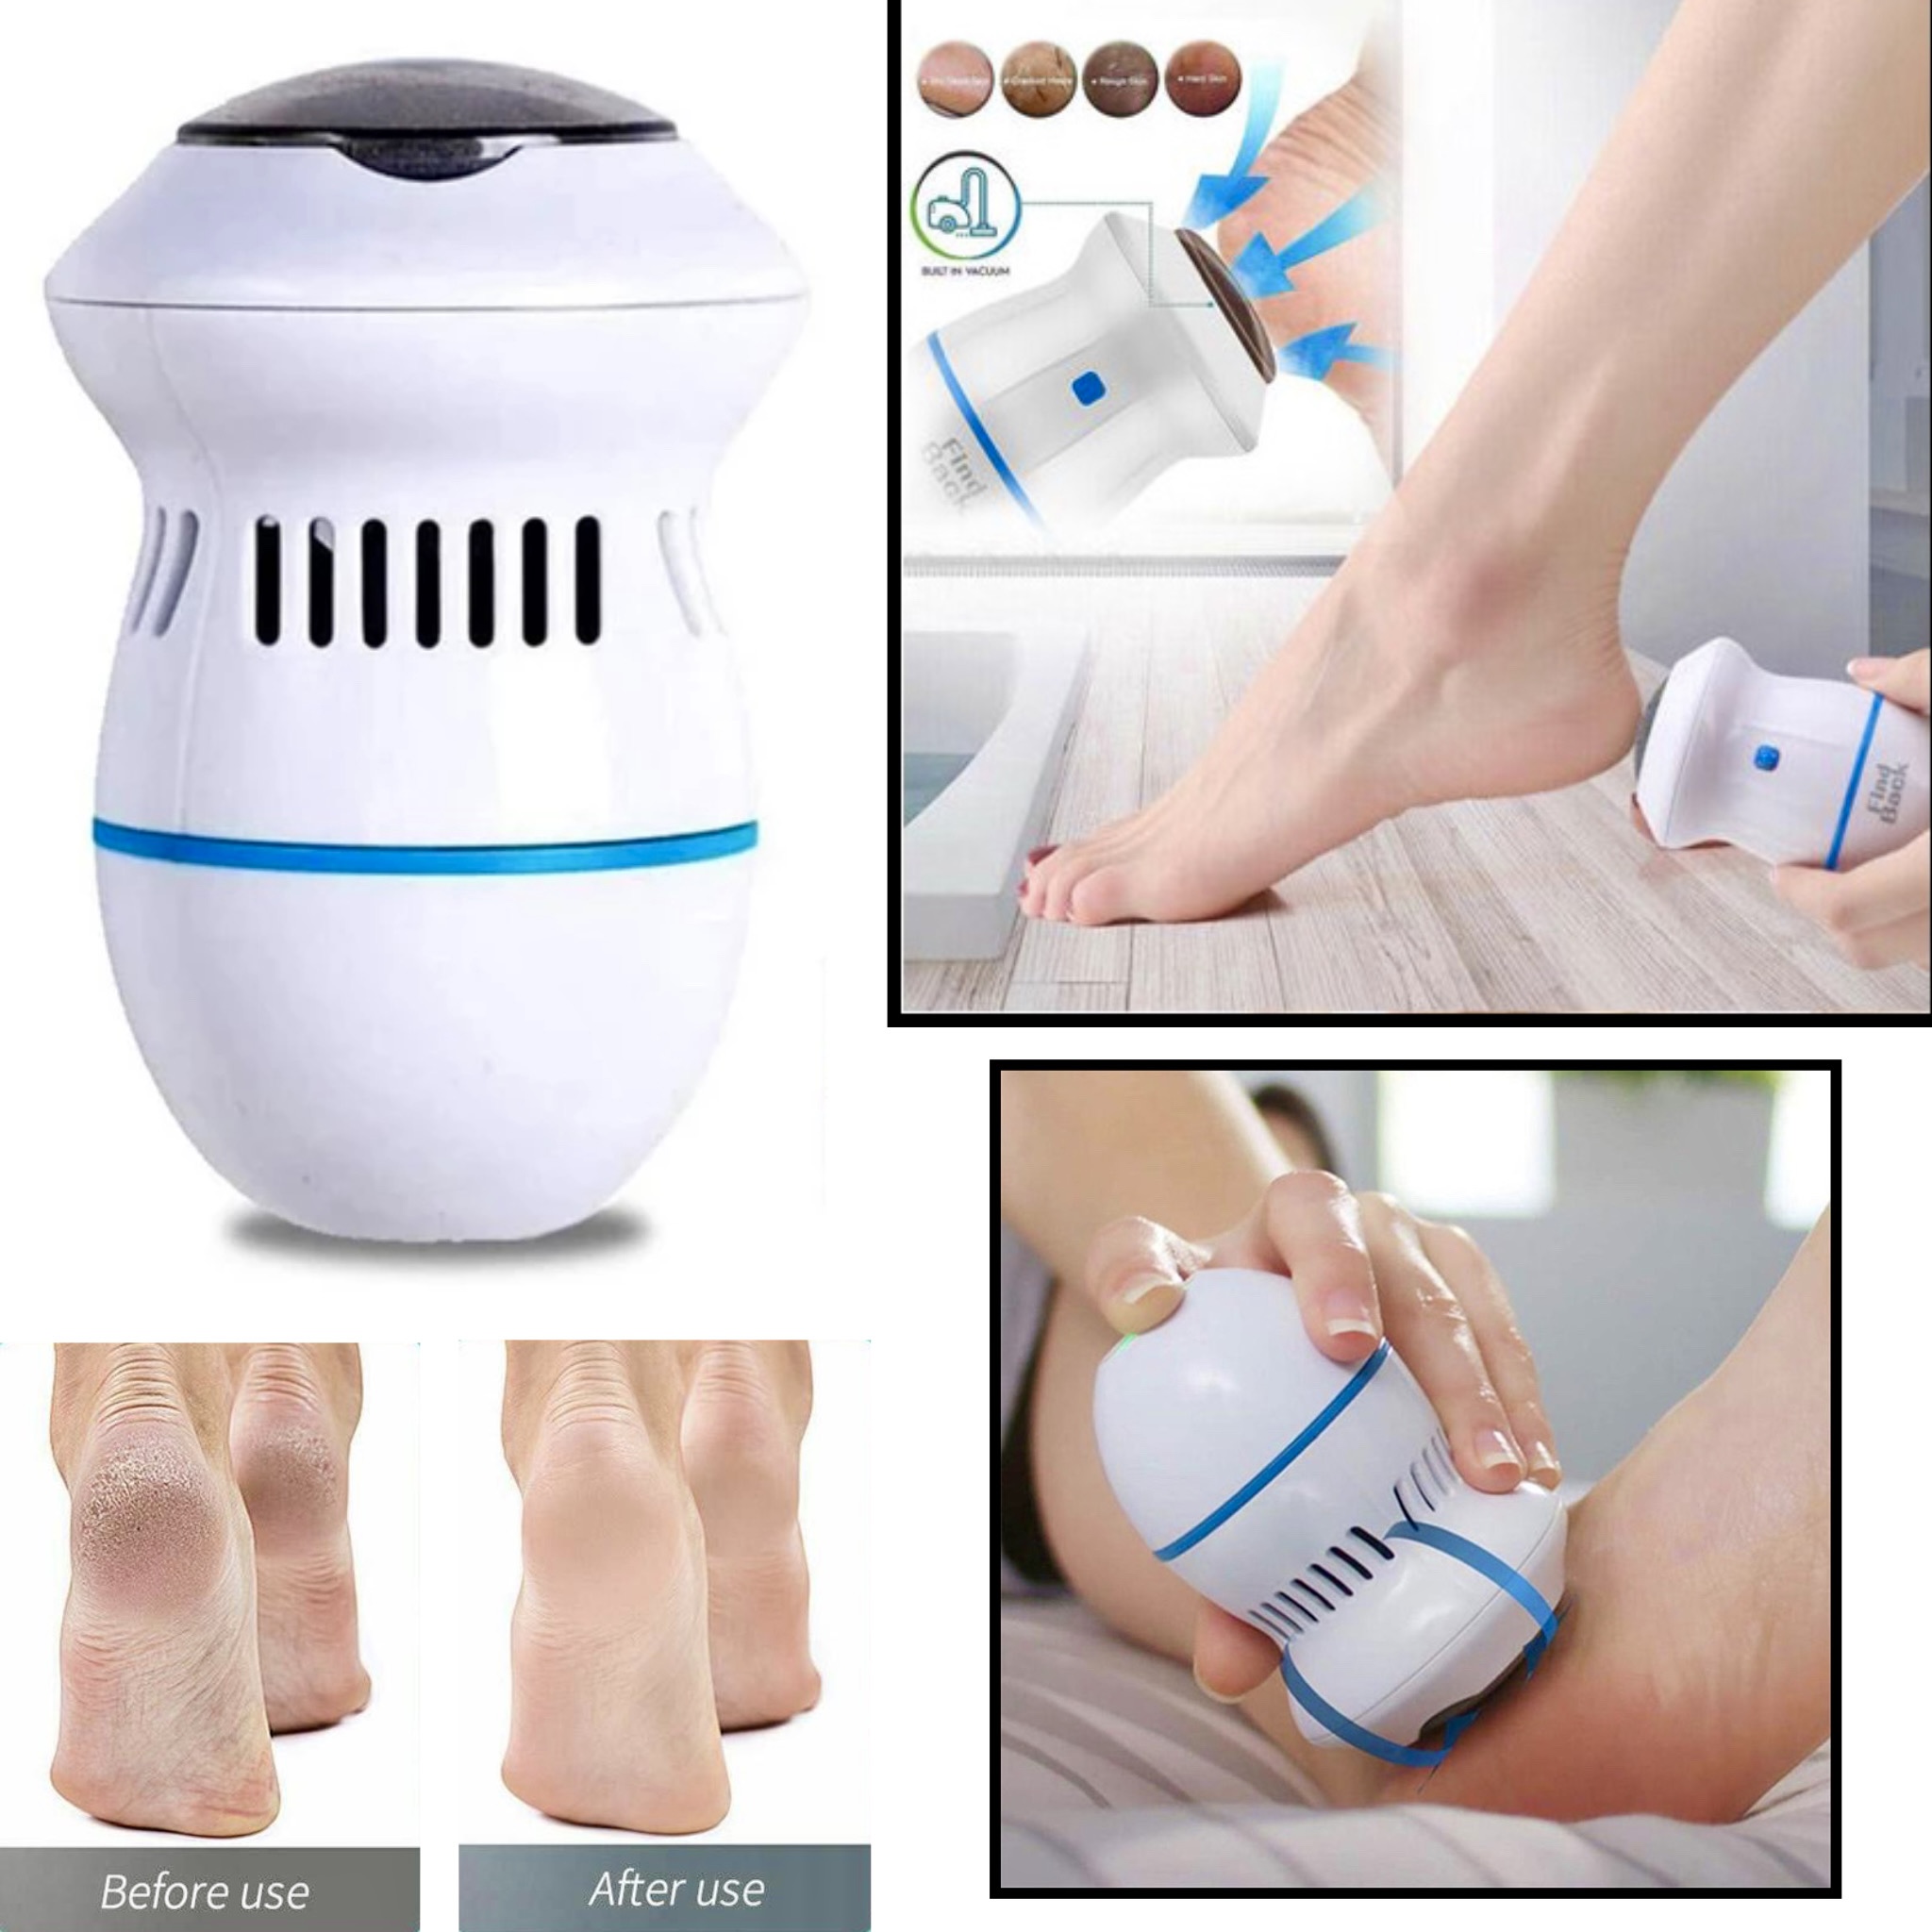 Electric Automatic Foot Pedicure Grinder Remover Dead Skin Remover